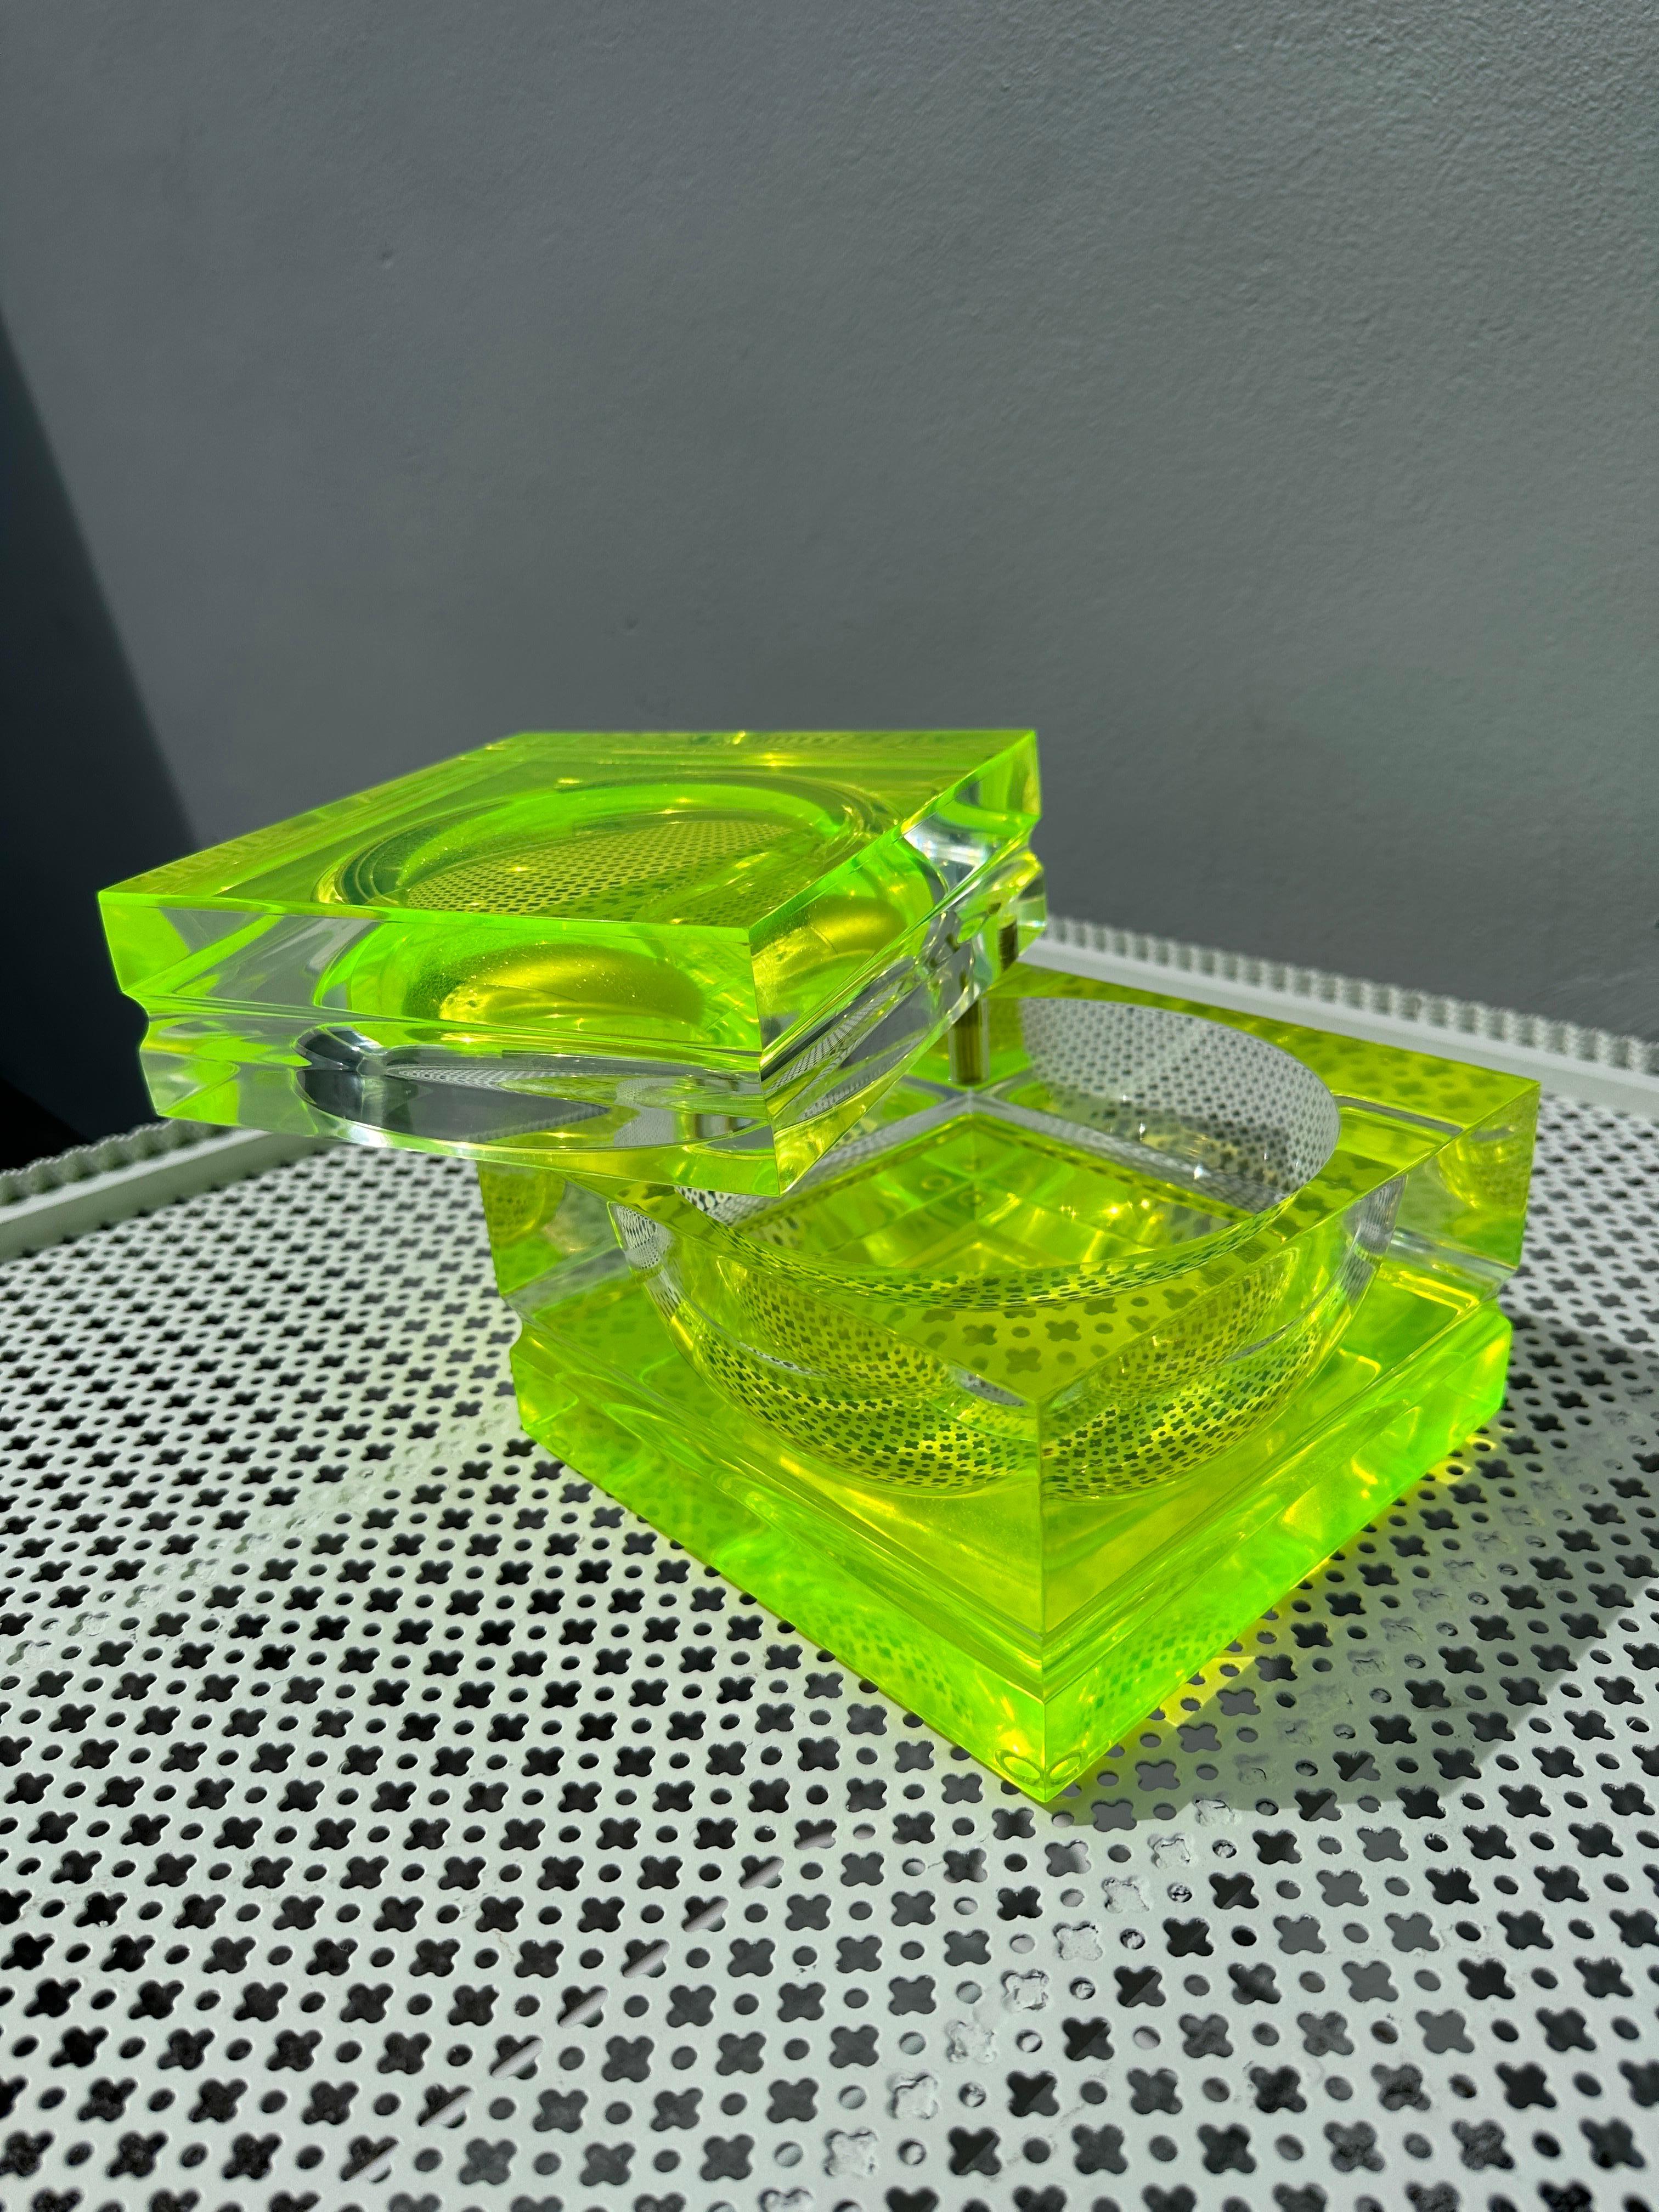 This faceted acrylic box with swivel top is a perfect decorative bowl or candy dish! Made in Italy by Alessandro Albrizzi.